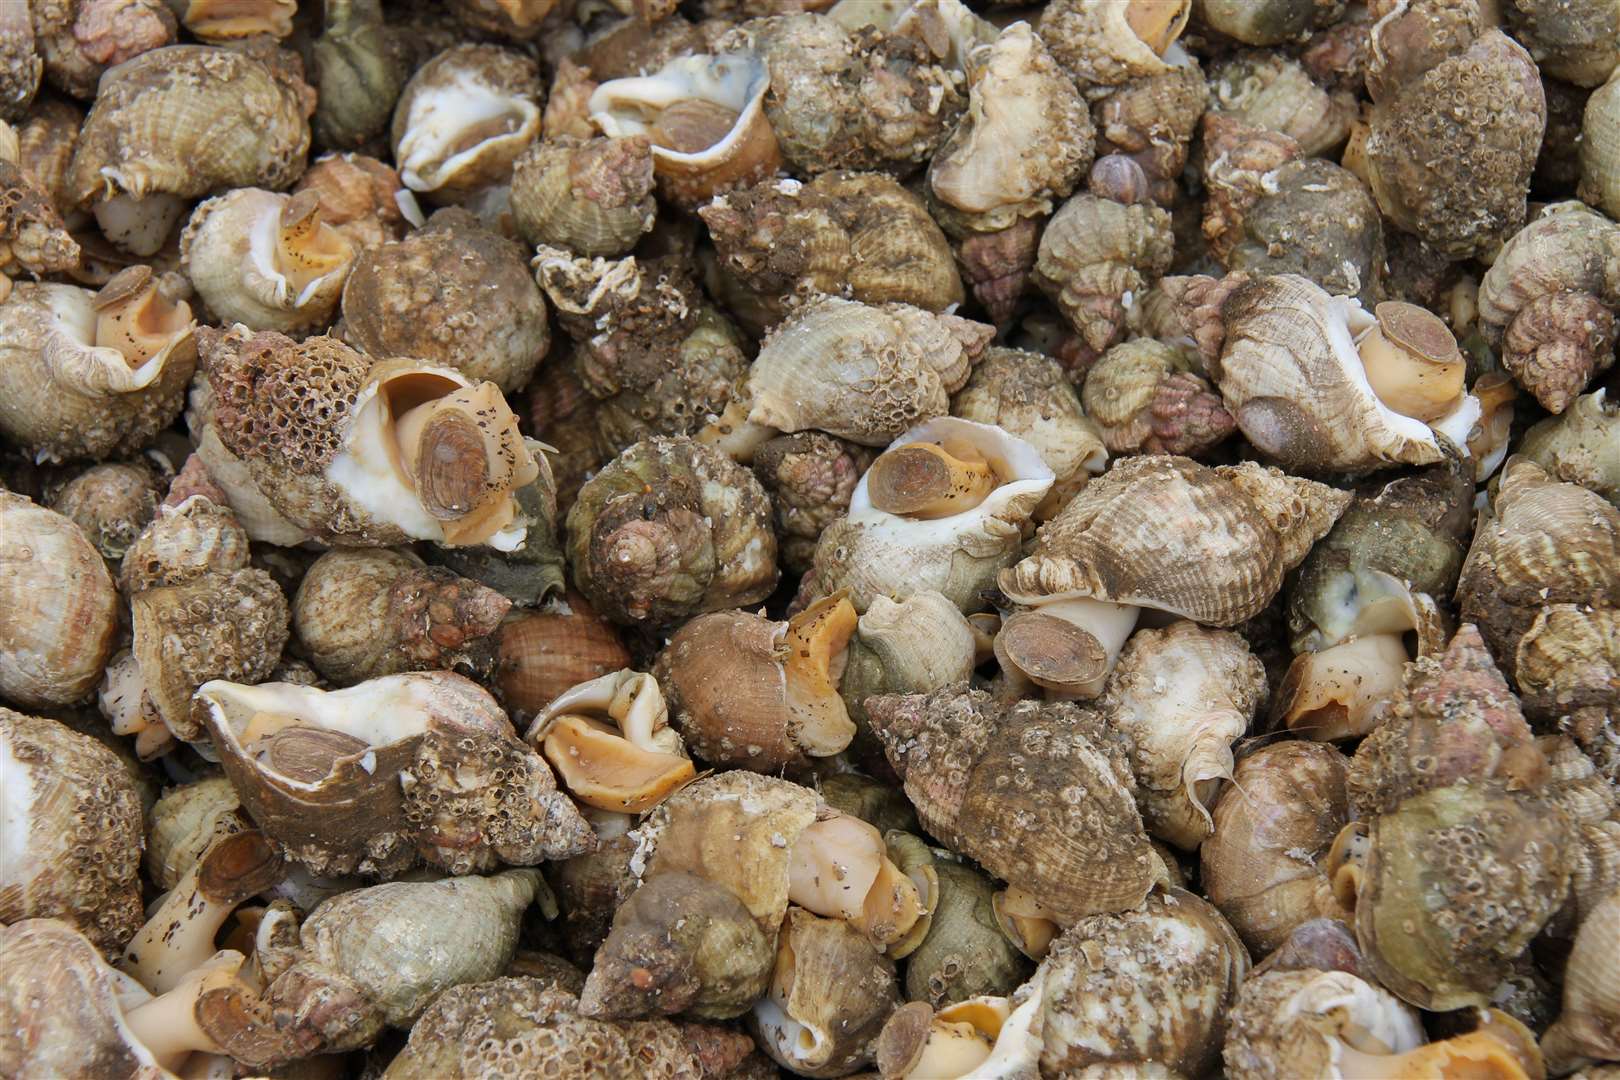 They're not going to win any beauty awards, but whelks pack a punch